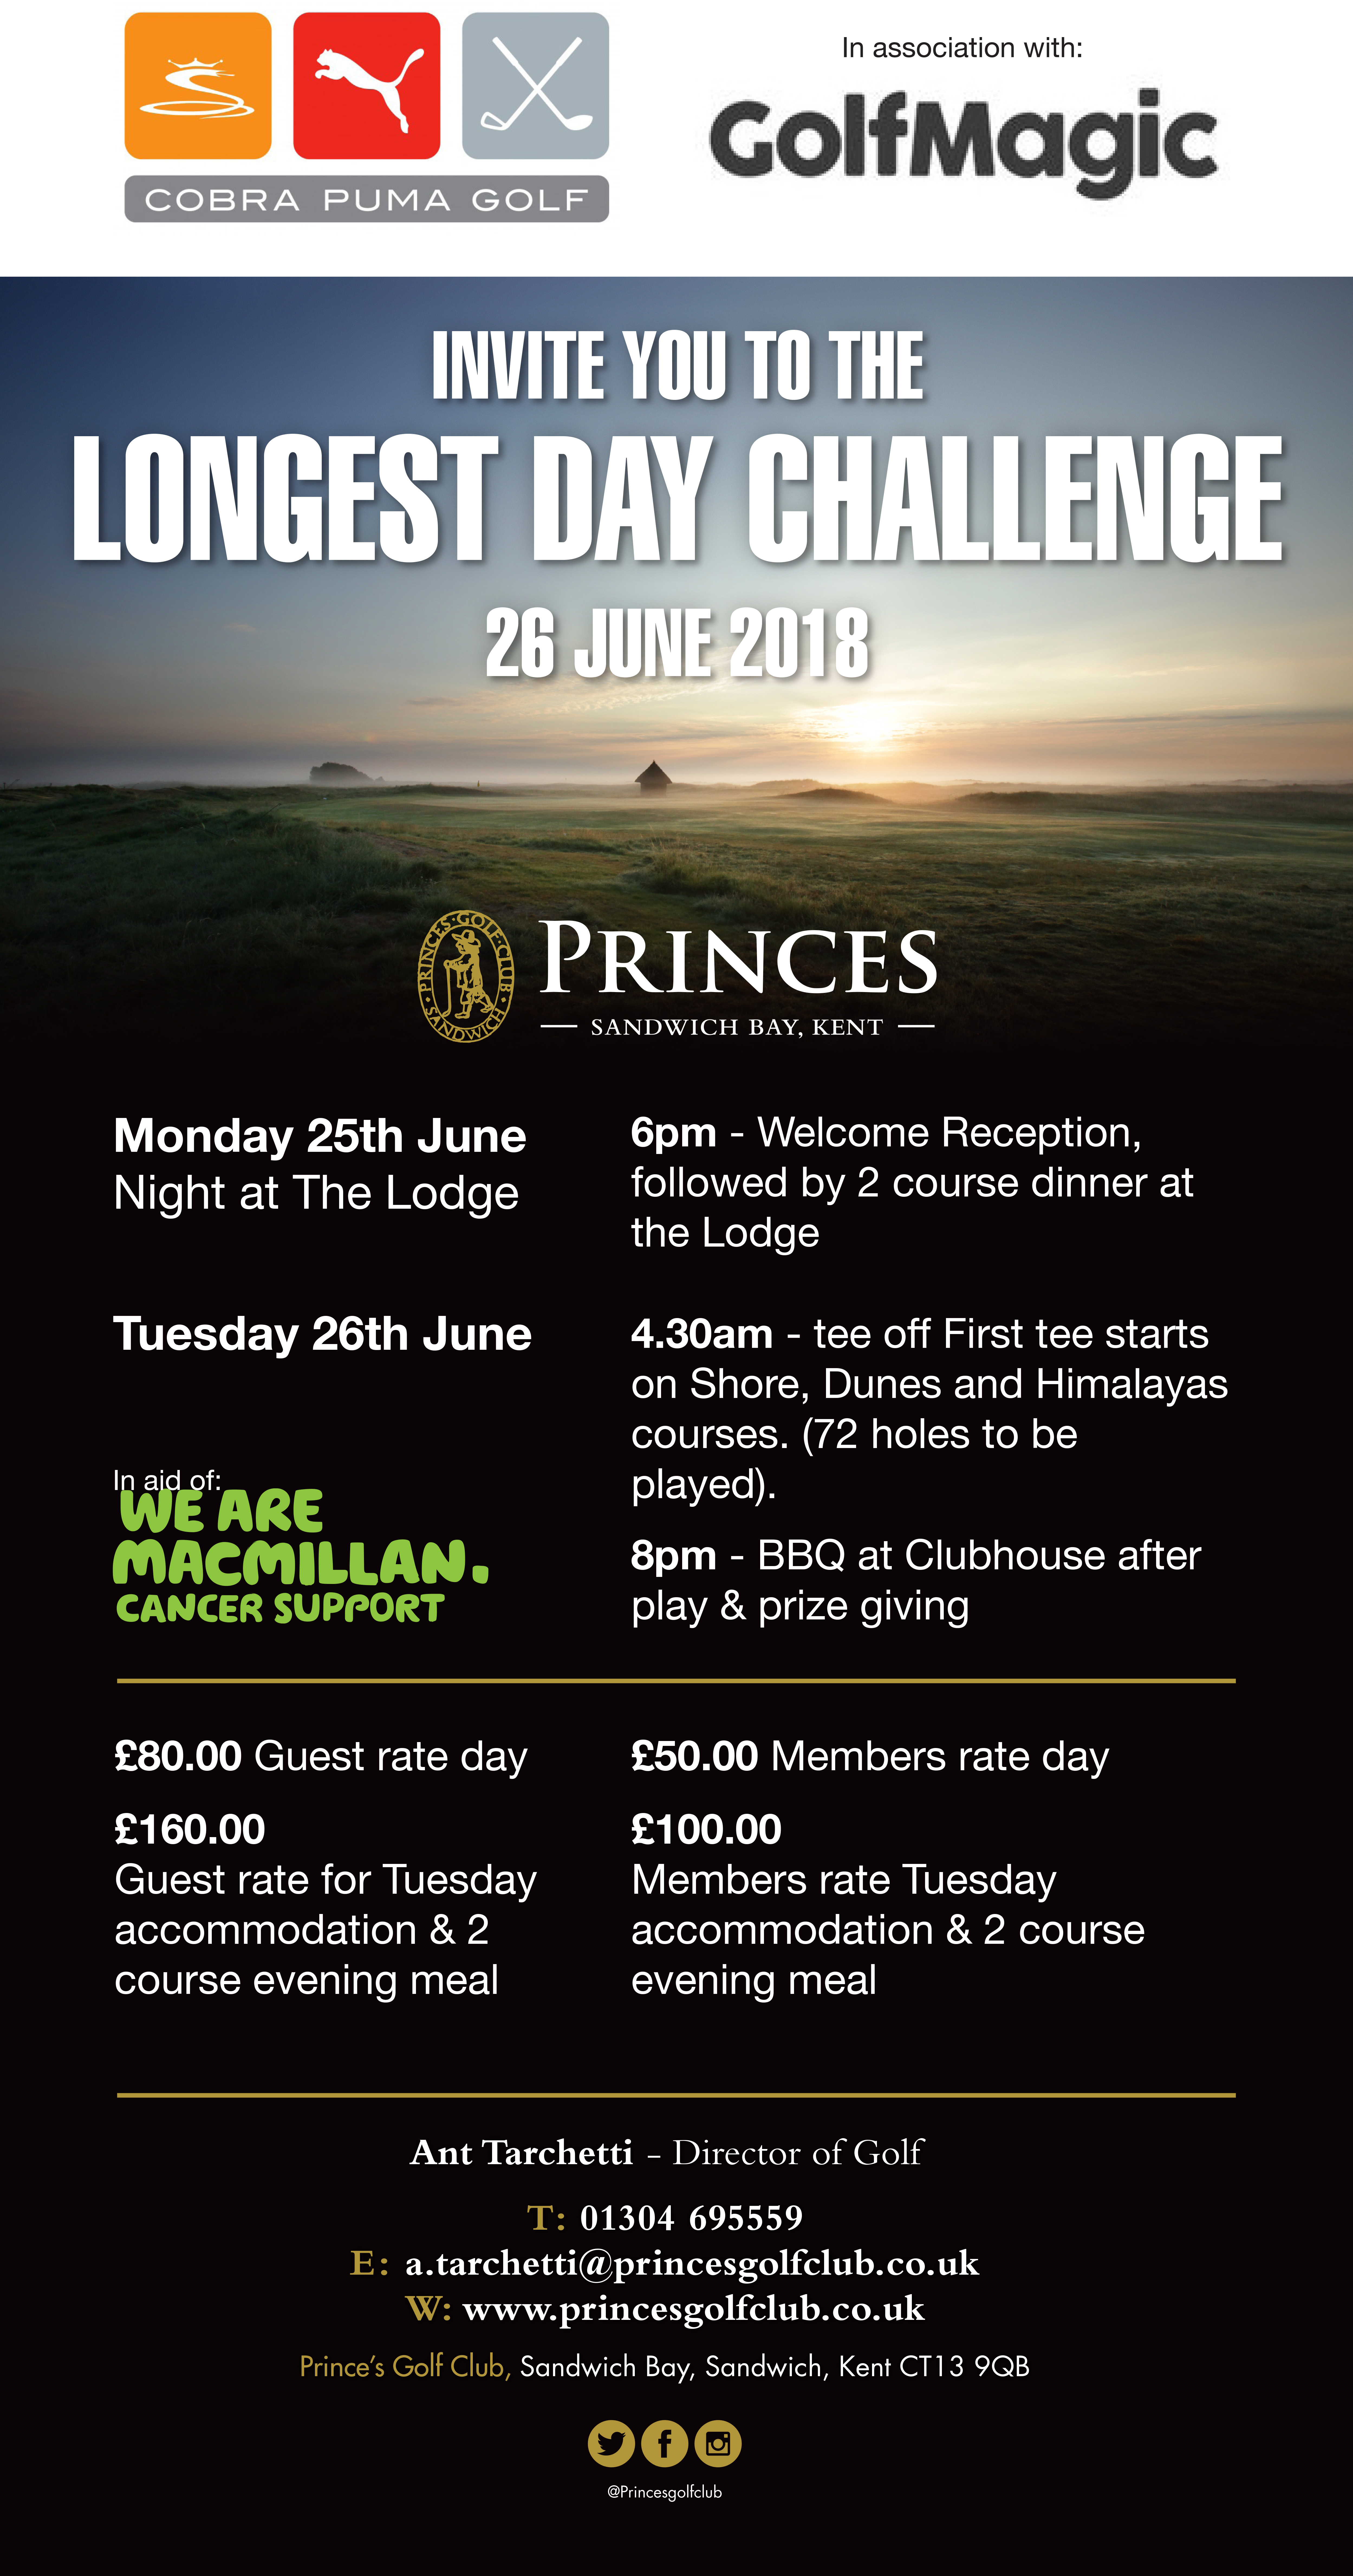 GolfMagic and Cobra Puma Golf invites you to the Longest Day Challenge